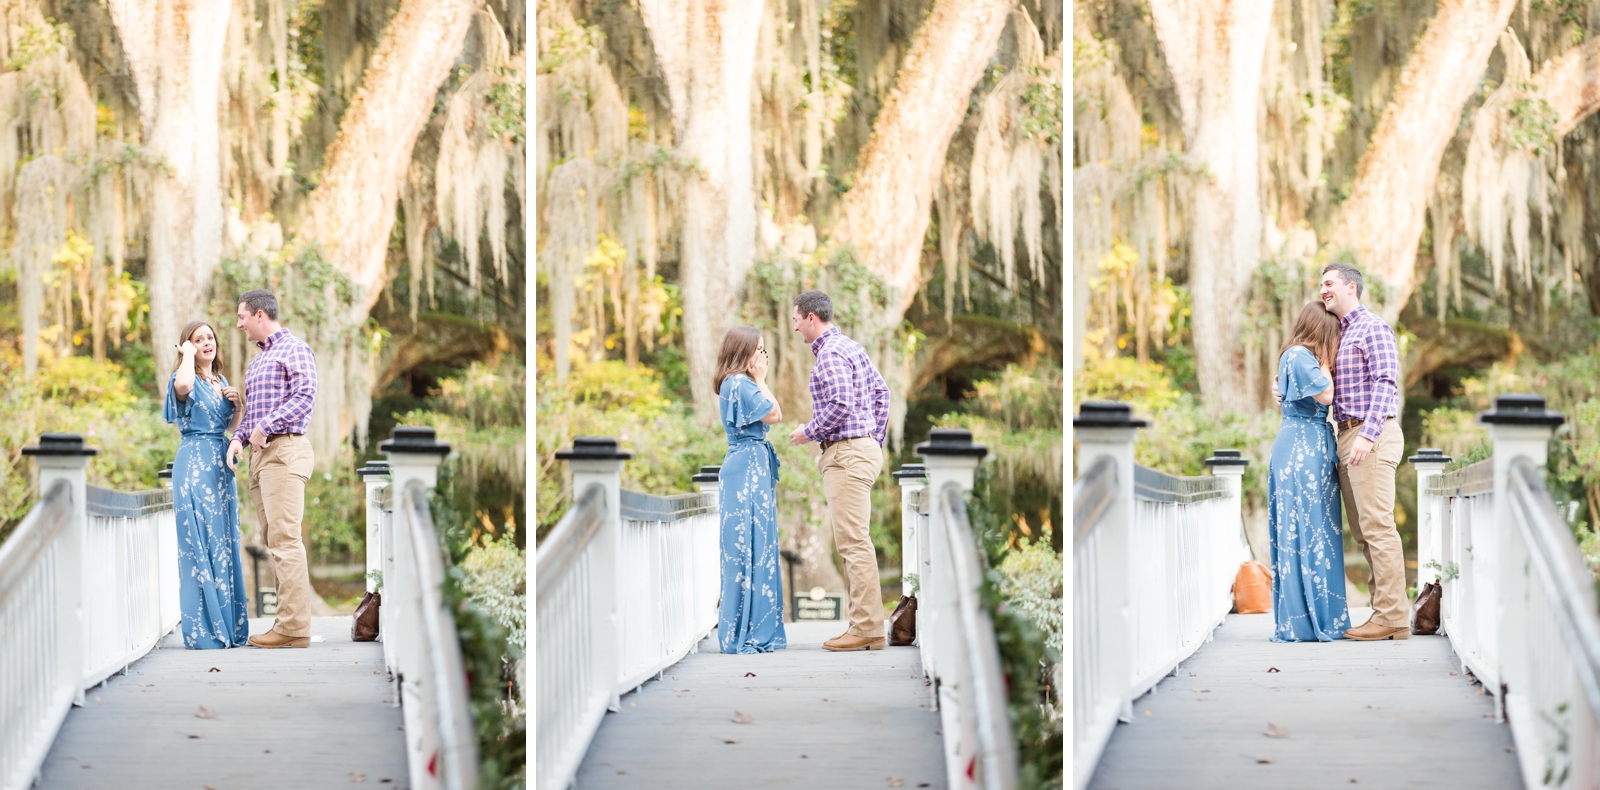 Our Proposal - Sydney Bruton Photography